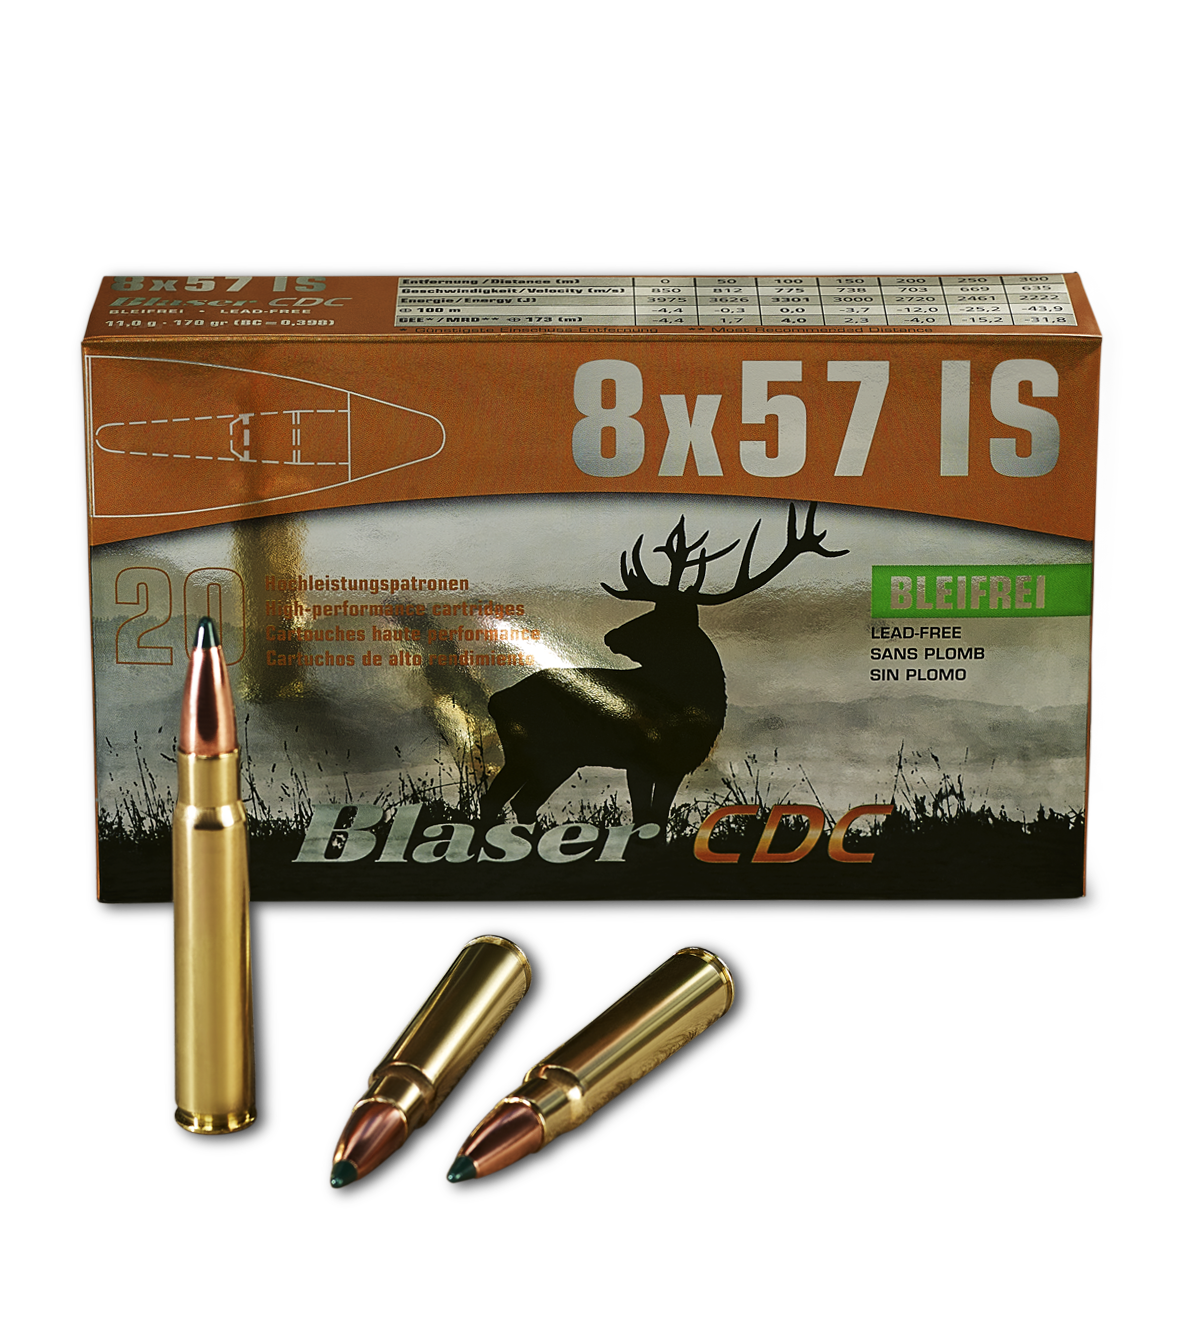 [Translate to Englisch:] Blaser Munition Controlled Deformation Copper 8x57 IS Verpackung